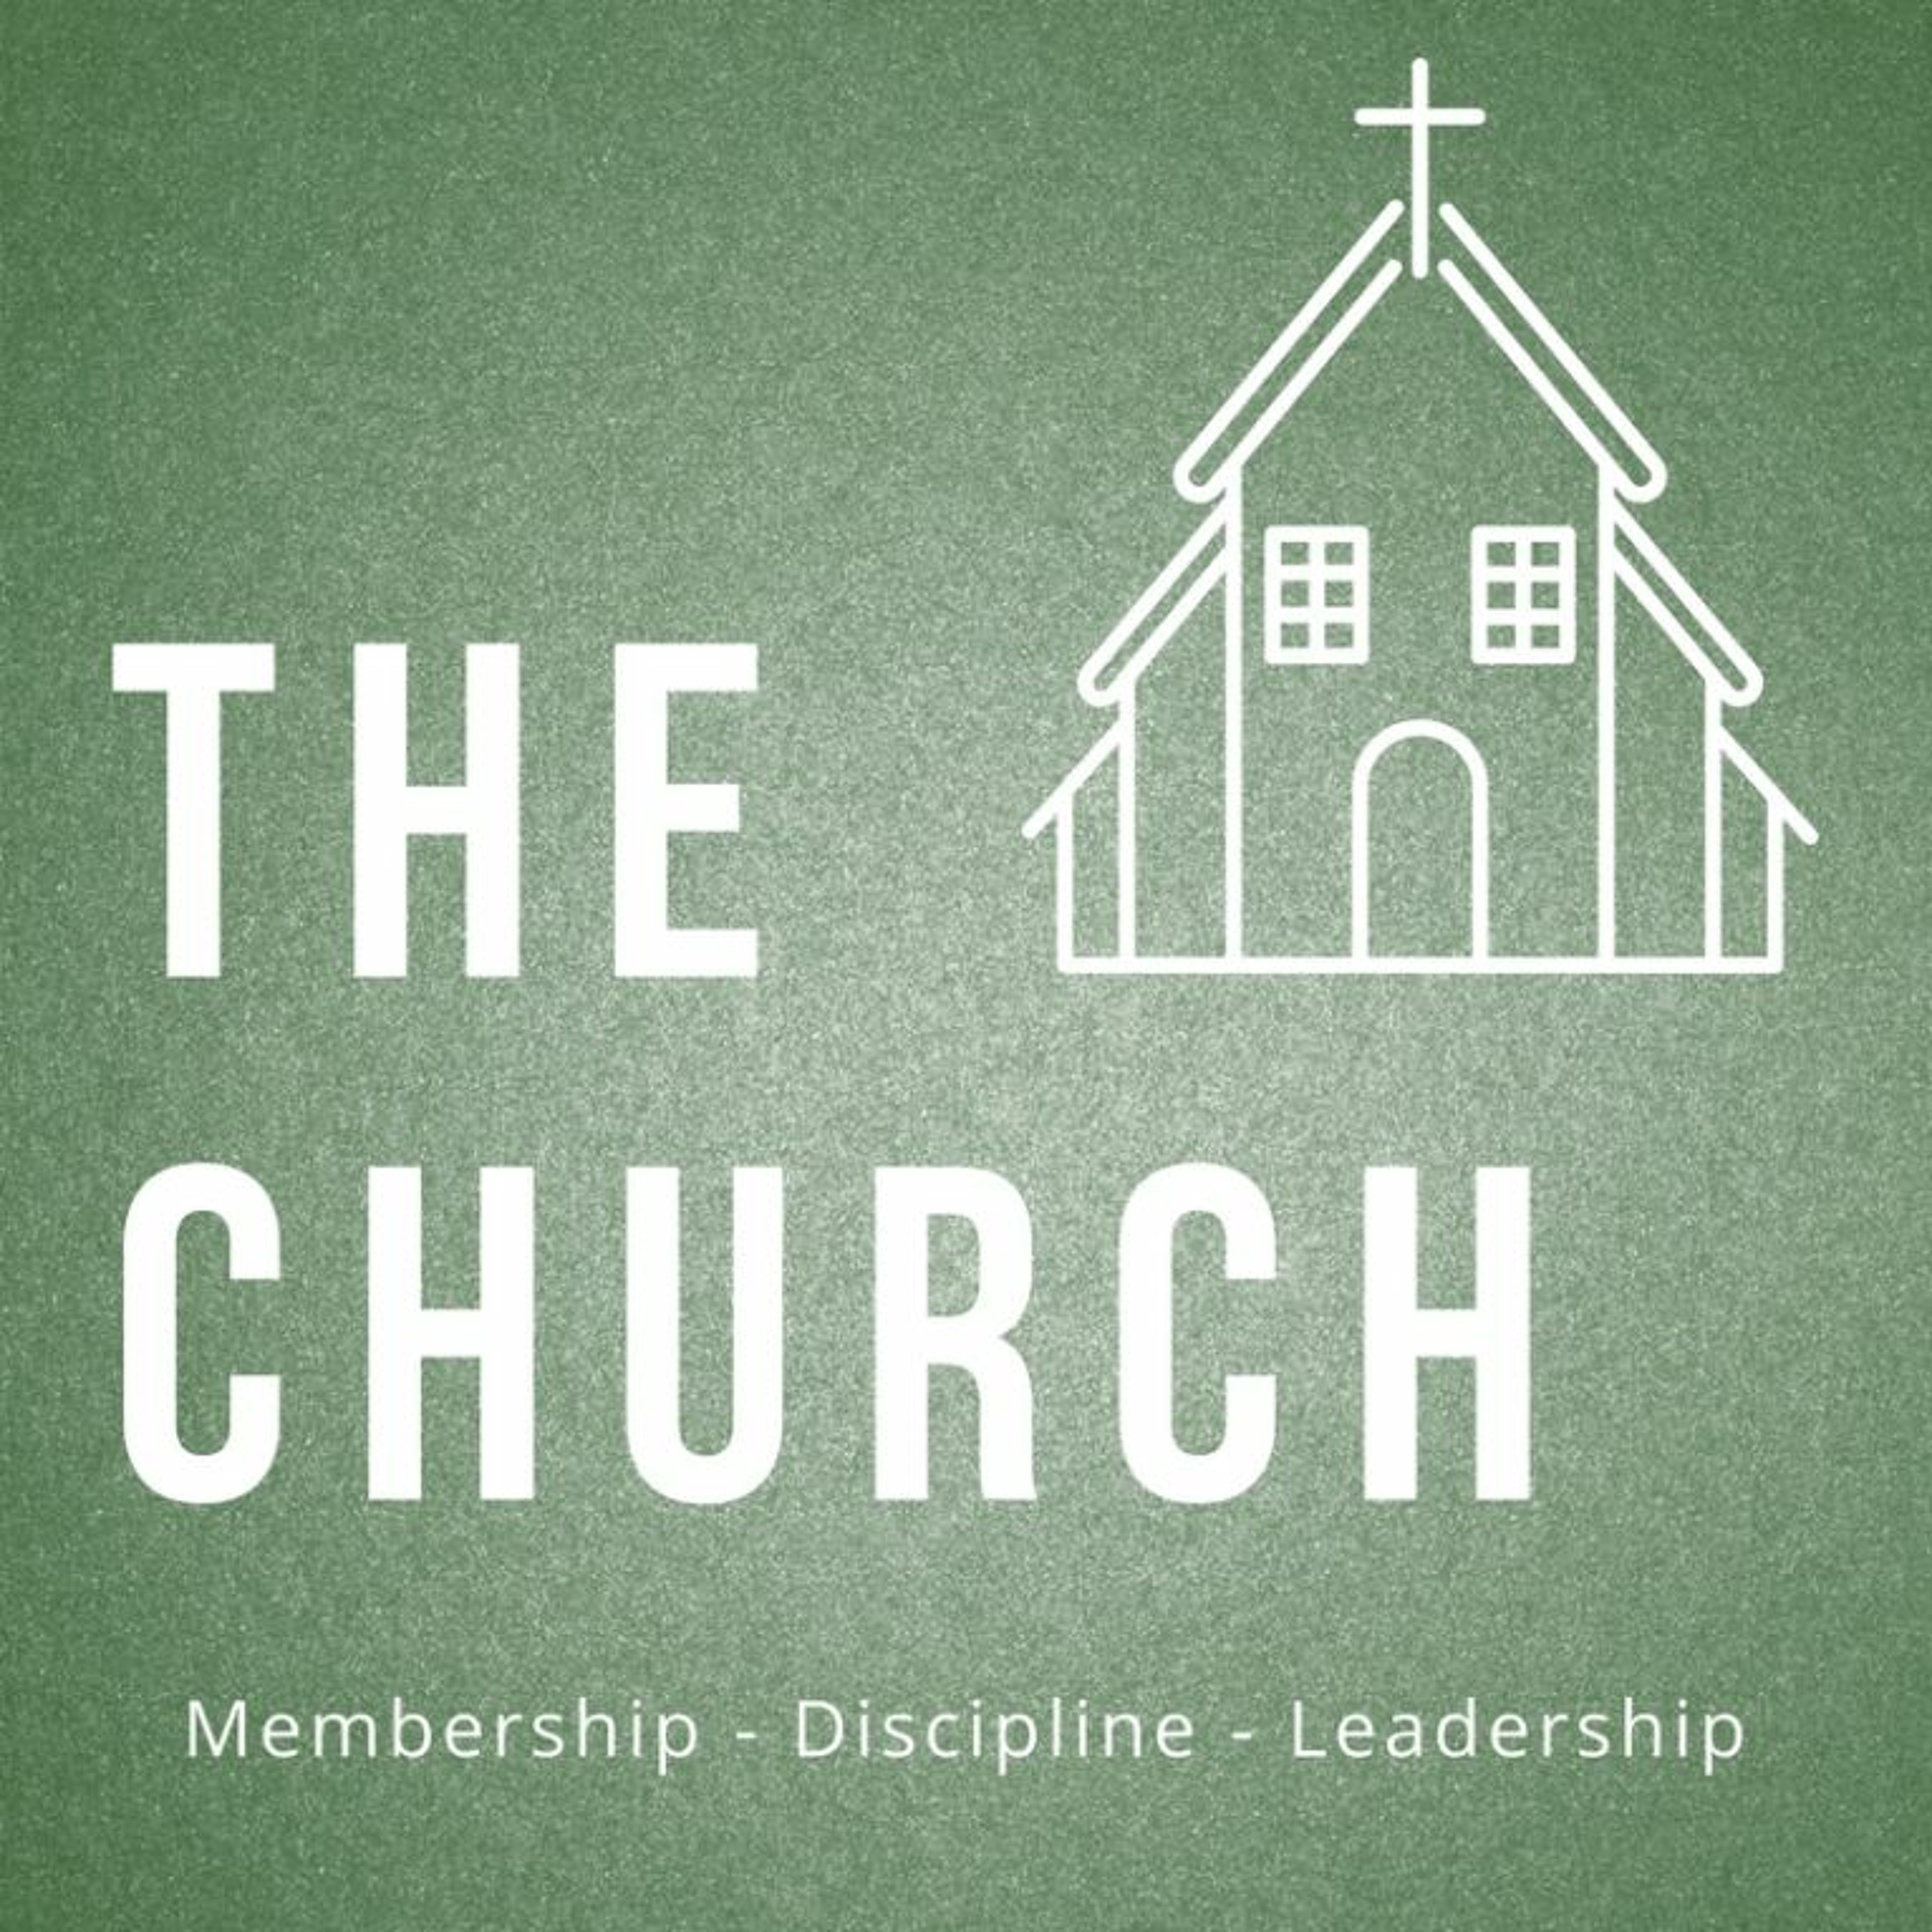 The Church Leadership (Acts 6:1-7)